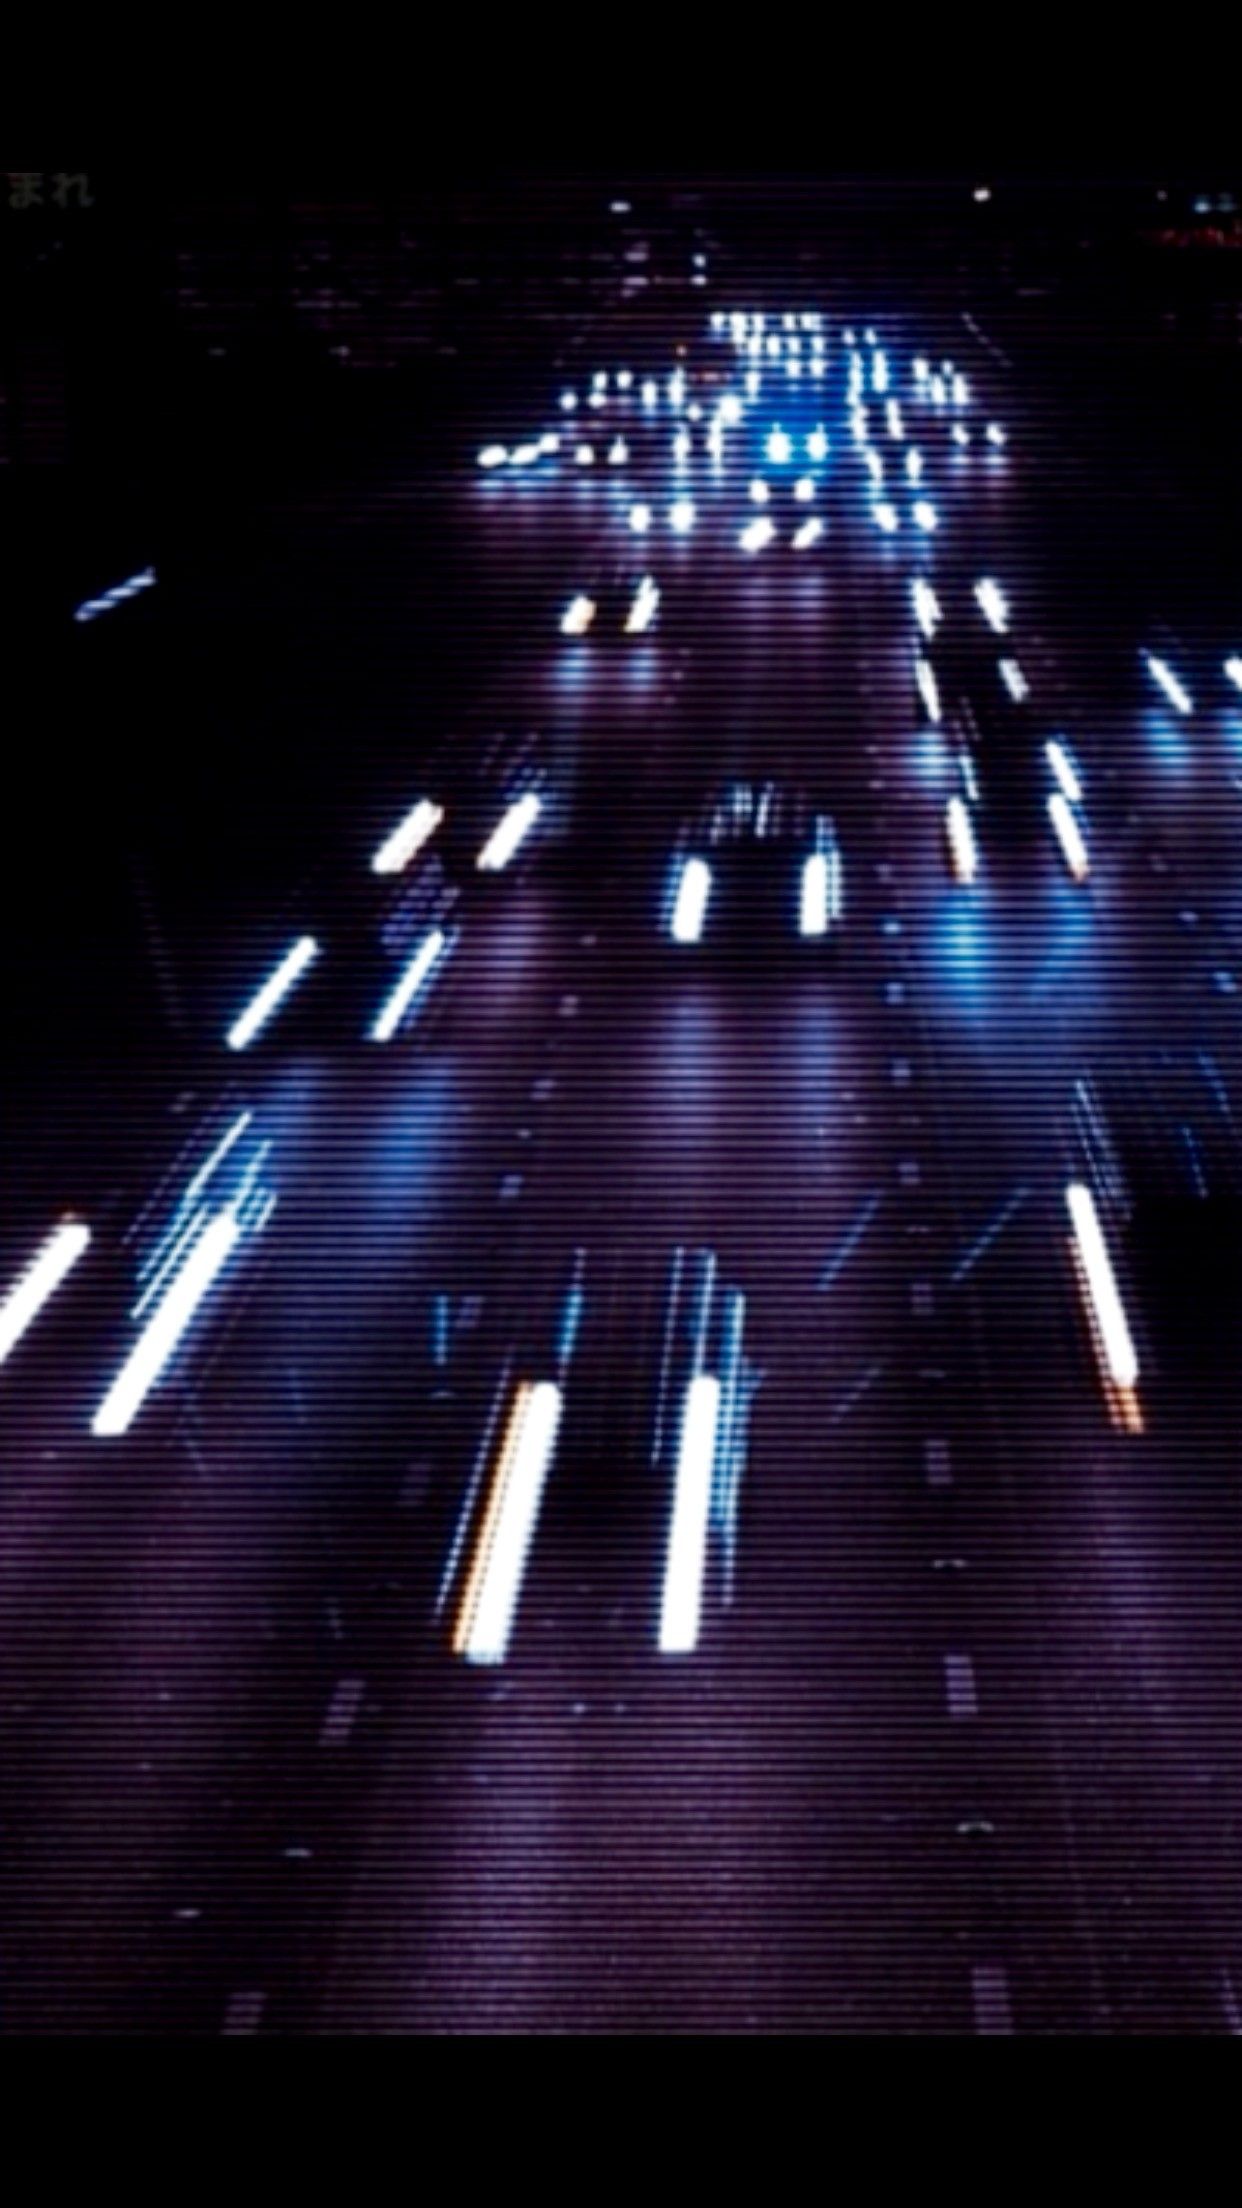 A highway at night with bright lights - Grunge, blurry, cars